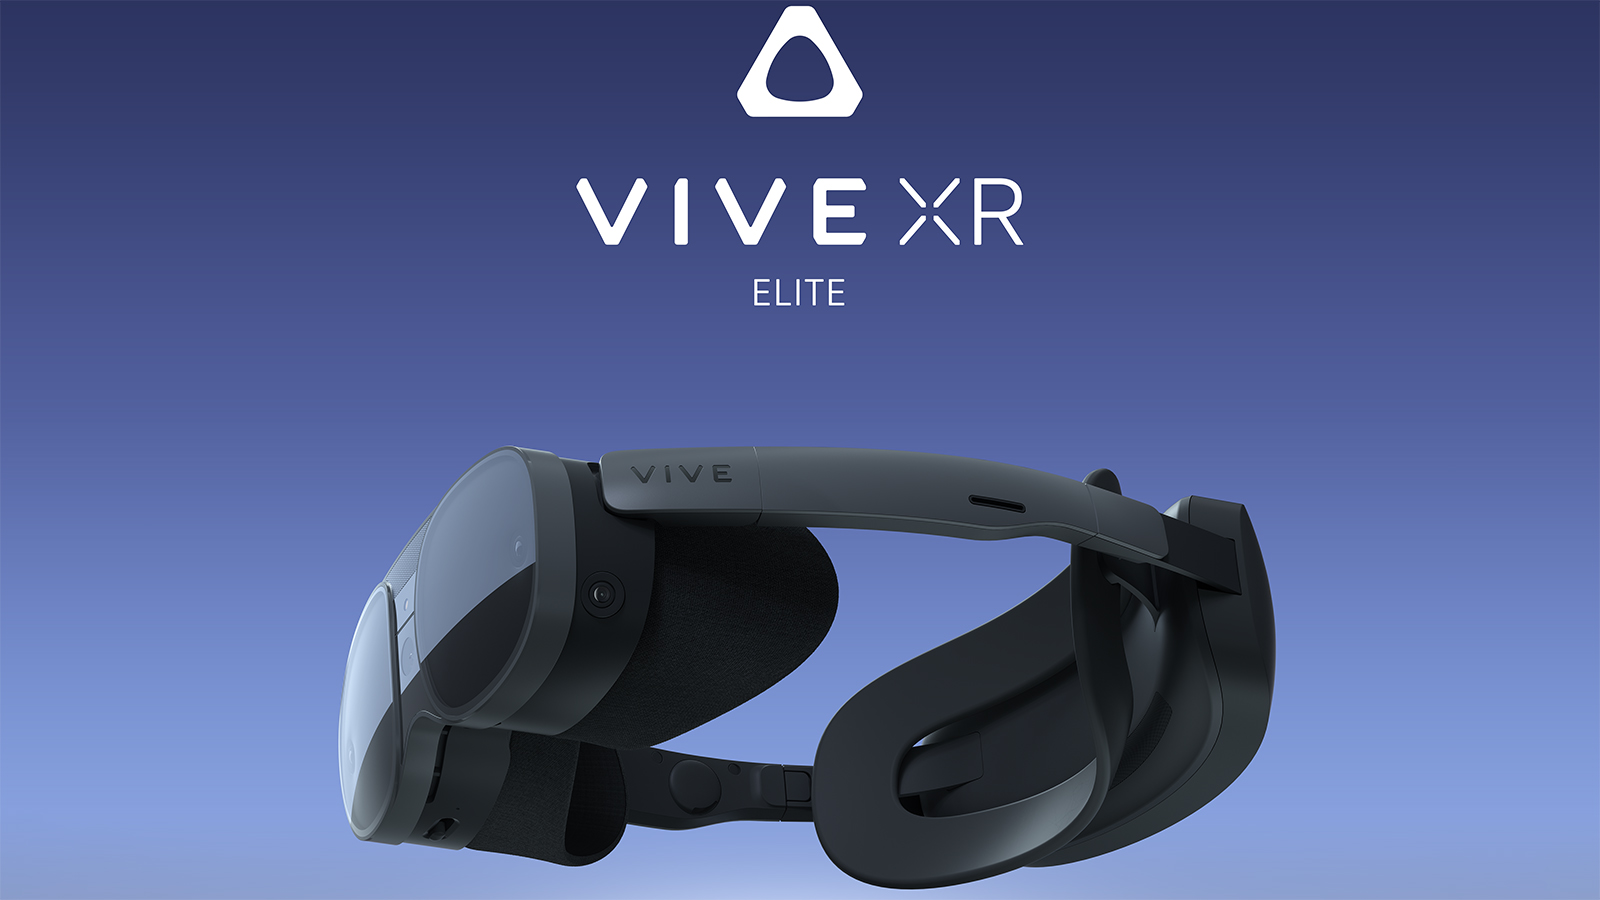 HTC VIVE XR Elite headset with battery connected